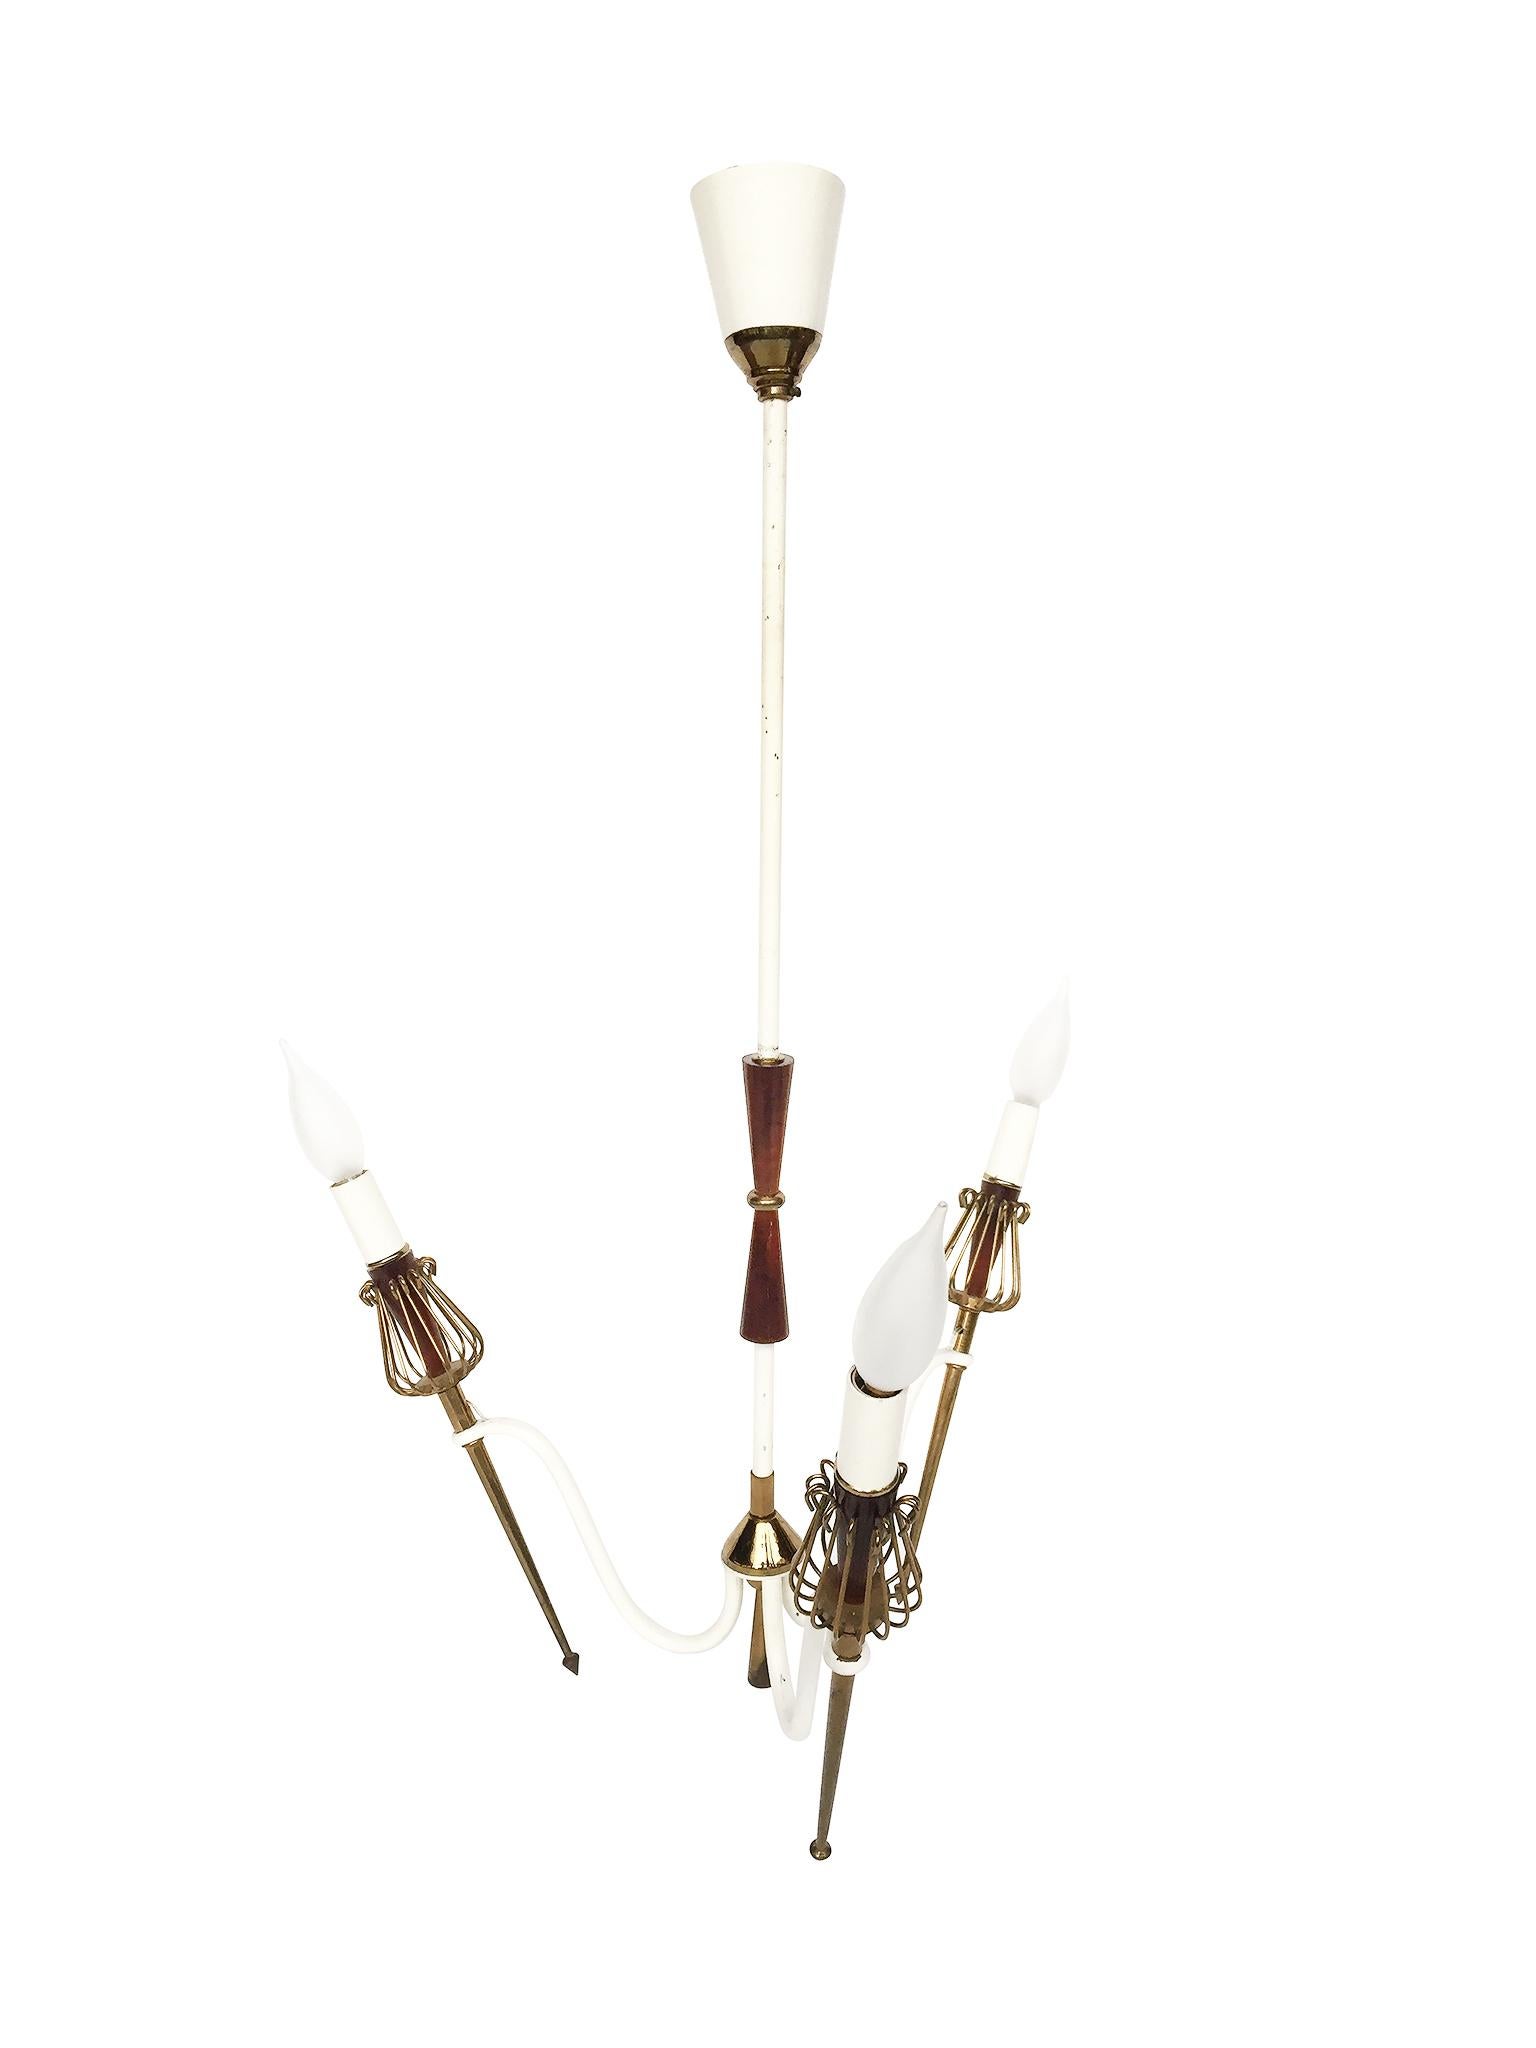 This three-light chandelier was created in the 1950s, in the style of Maison Lunel. Like the lamps and ceiling lights made by Maison Lunel, this chandelier combines modern and more traditional forms. The result is a balanced mix of minimal, spare